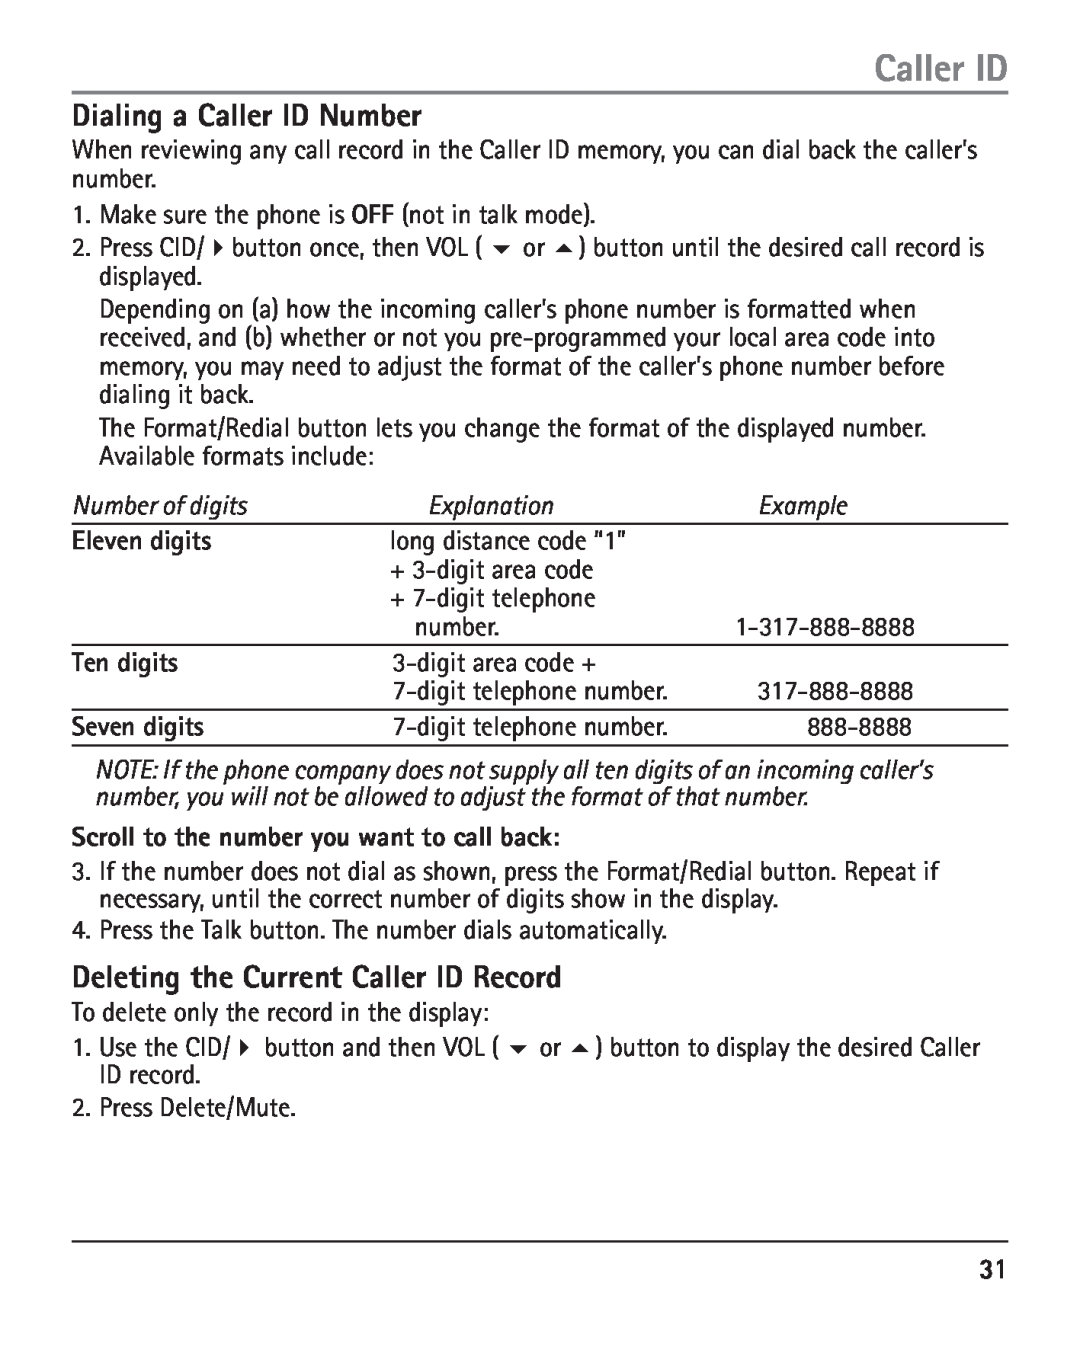 RCA 25420 manual Dialing a Caller ID Number, Deleting the Current Caller ID Record, Eleven digits, Ten digits, Seven digits 